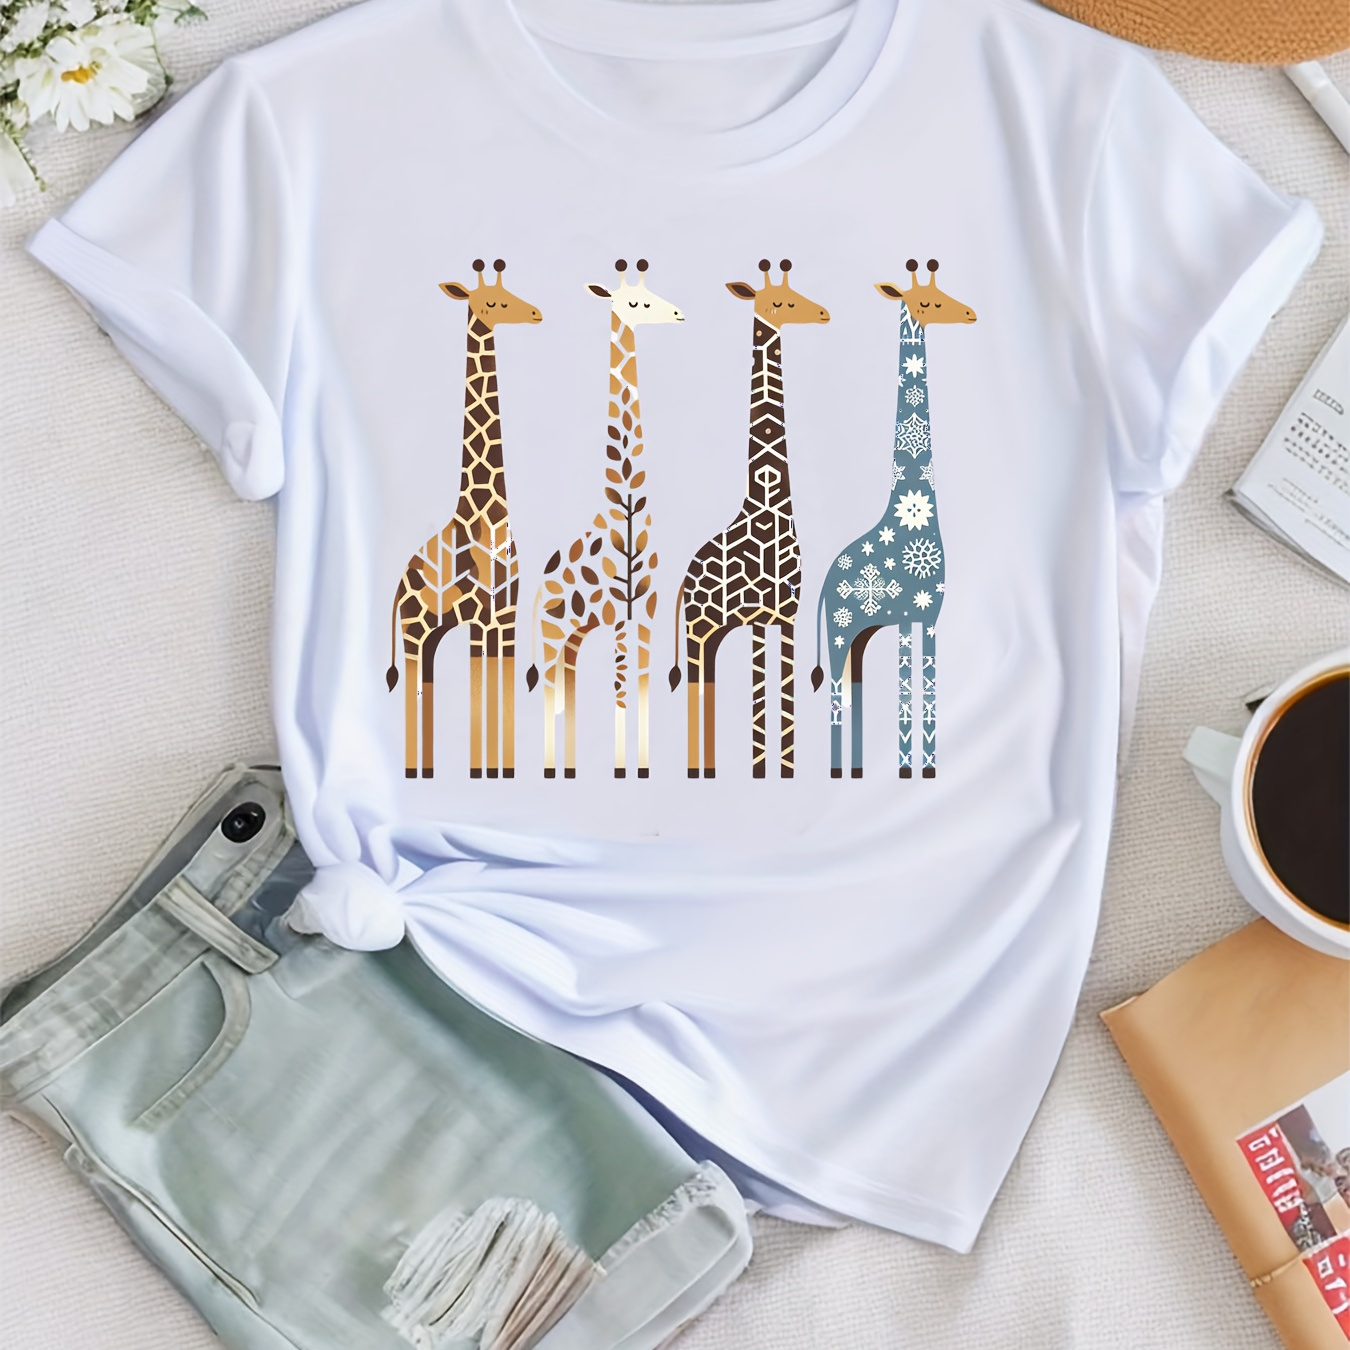 

Giraffe Graphic Print T-shirt, Short Sleeve Crew Neck Casual Top For Summer & Spring, Women's Clothing